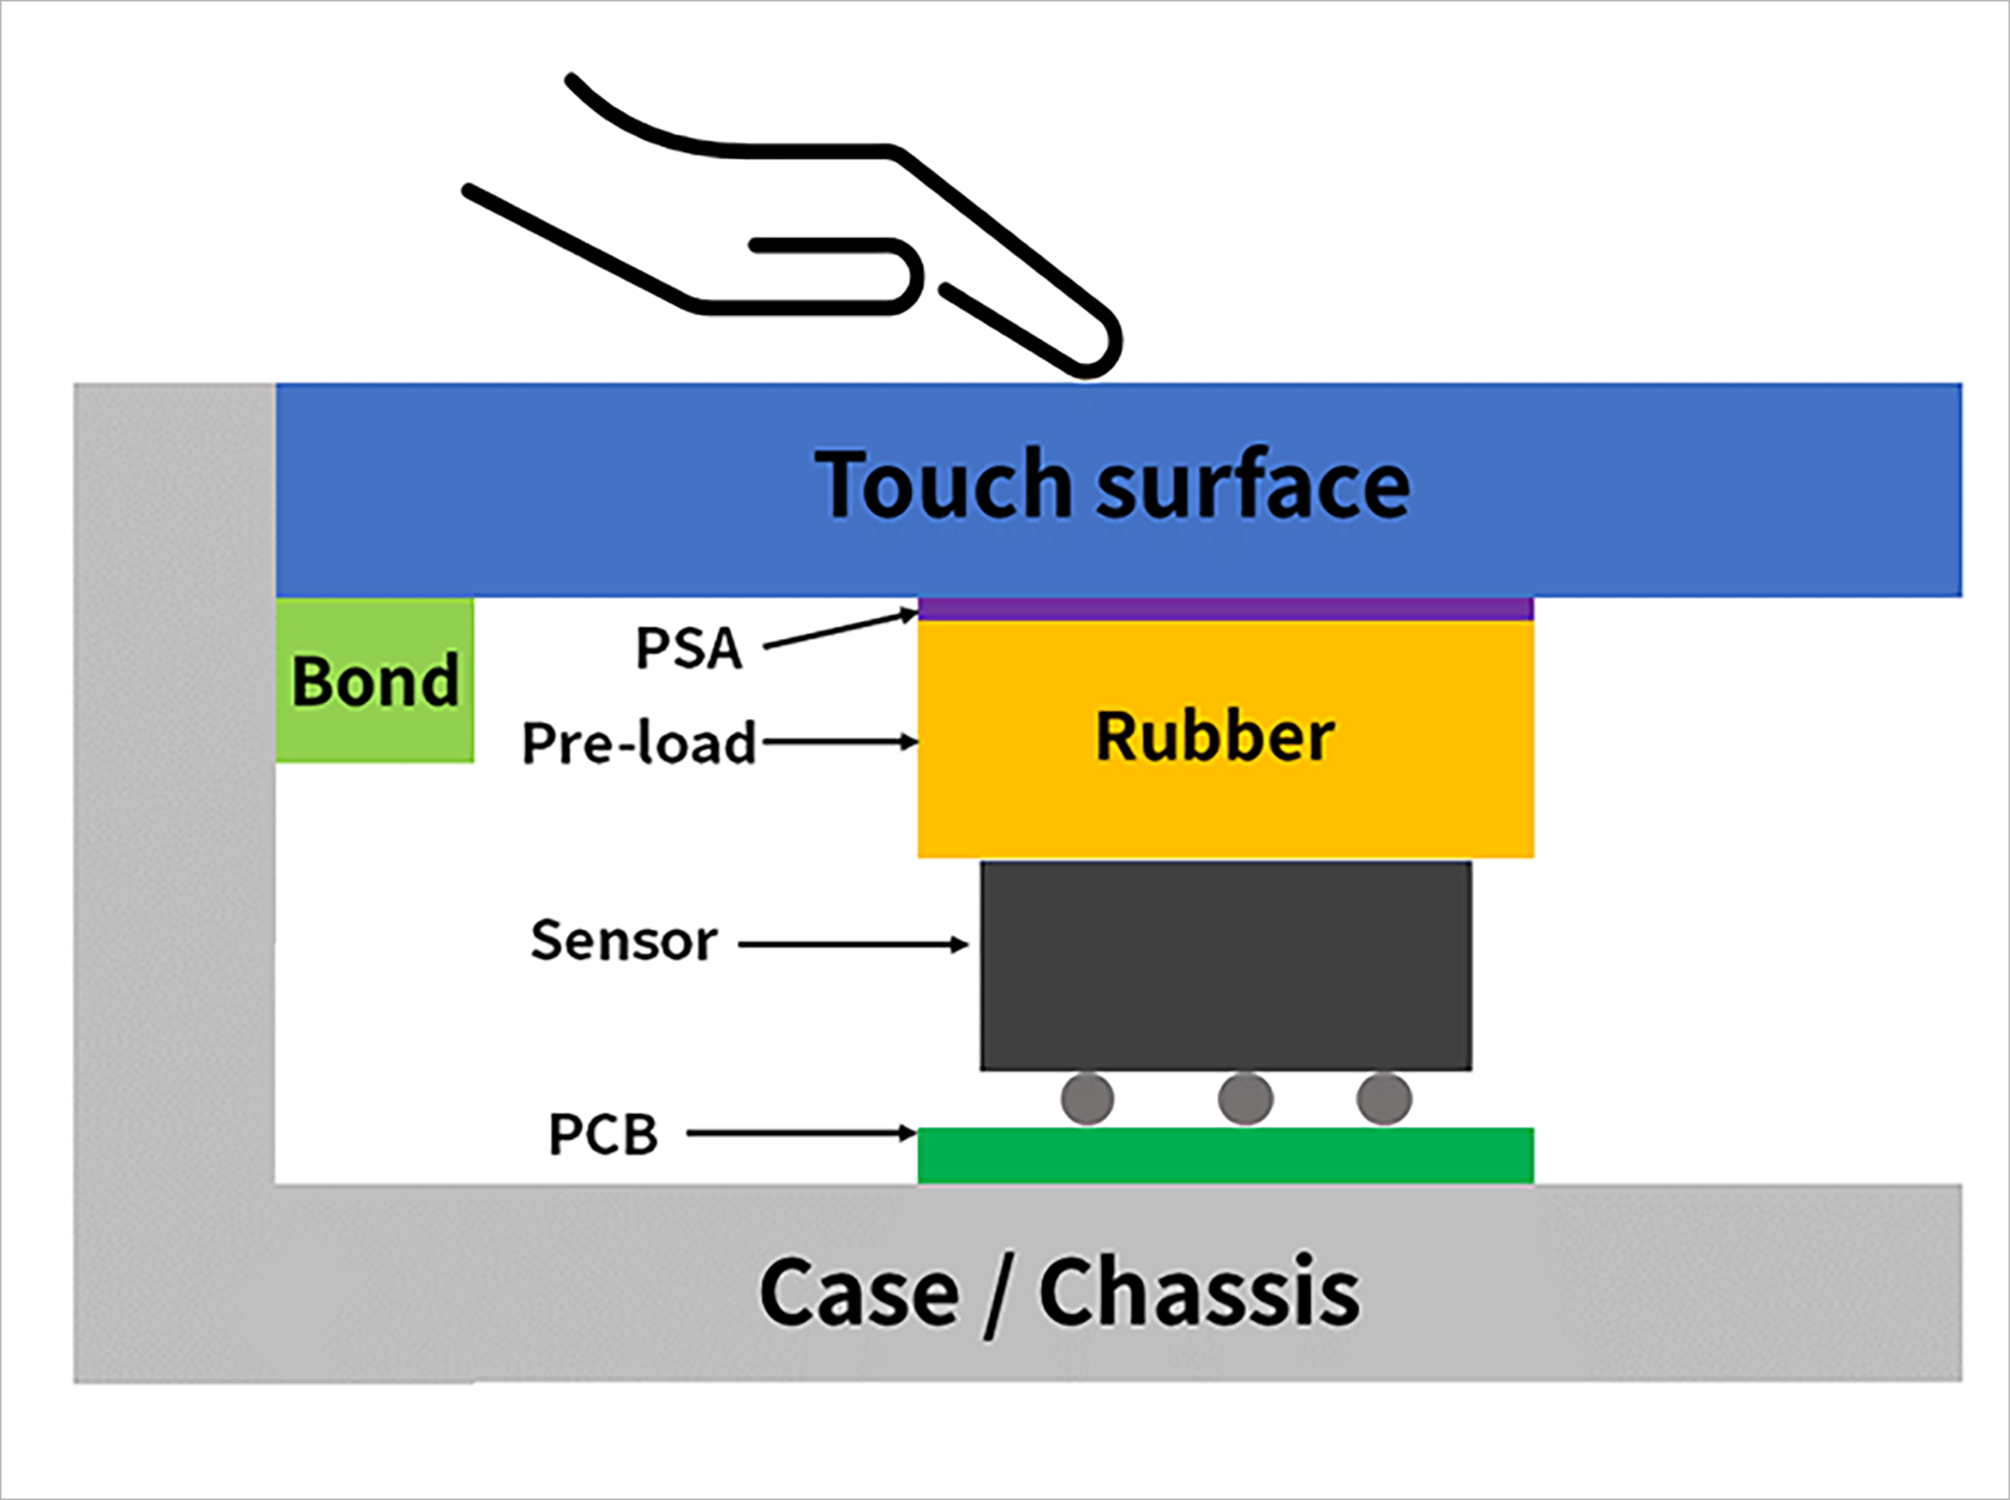 Implementation method 1: Rubber, sensor, and board configuration directly below the touch surface